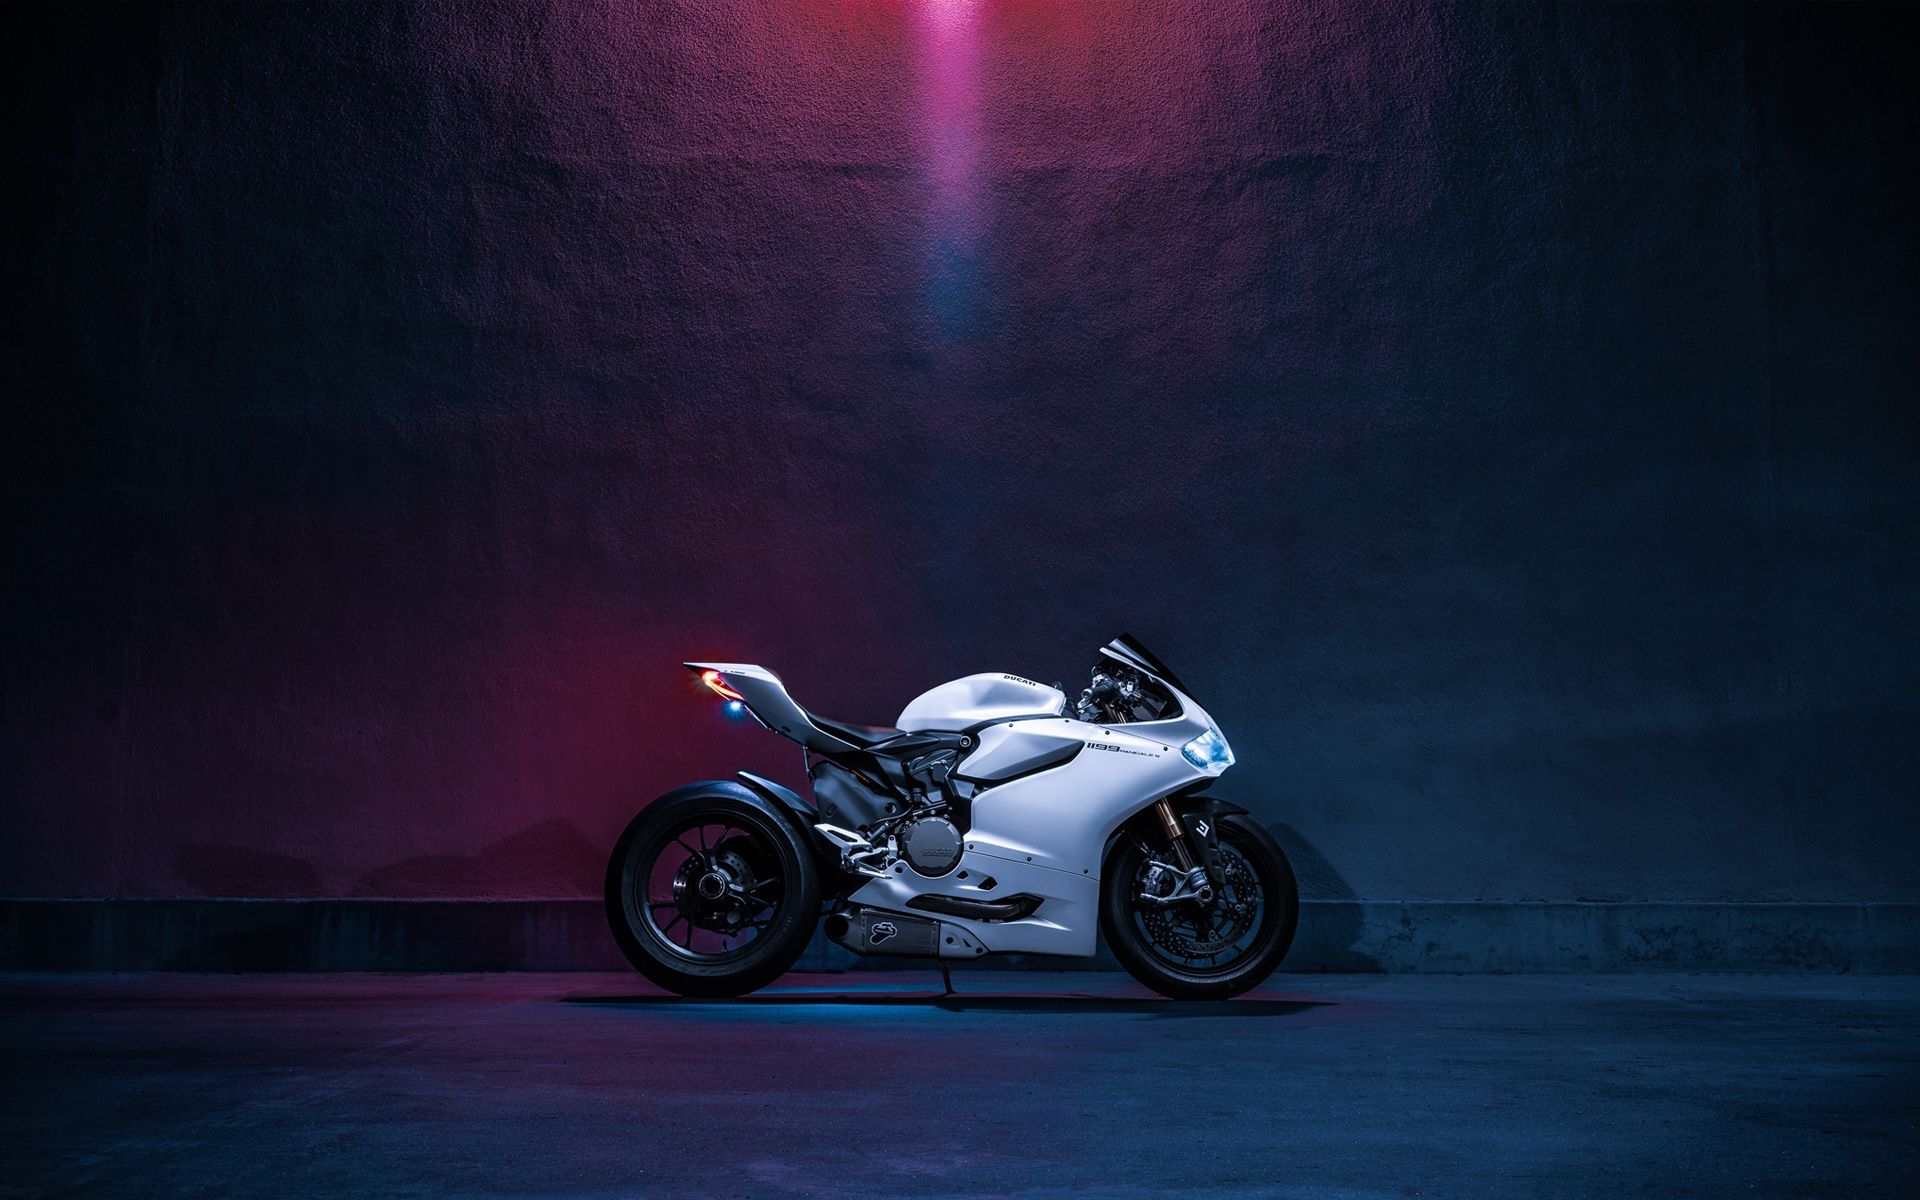 Wallpapers Tagged With DUCATI | DUCATI HD Wallpapers | Page 1